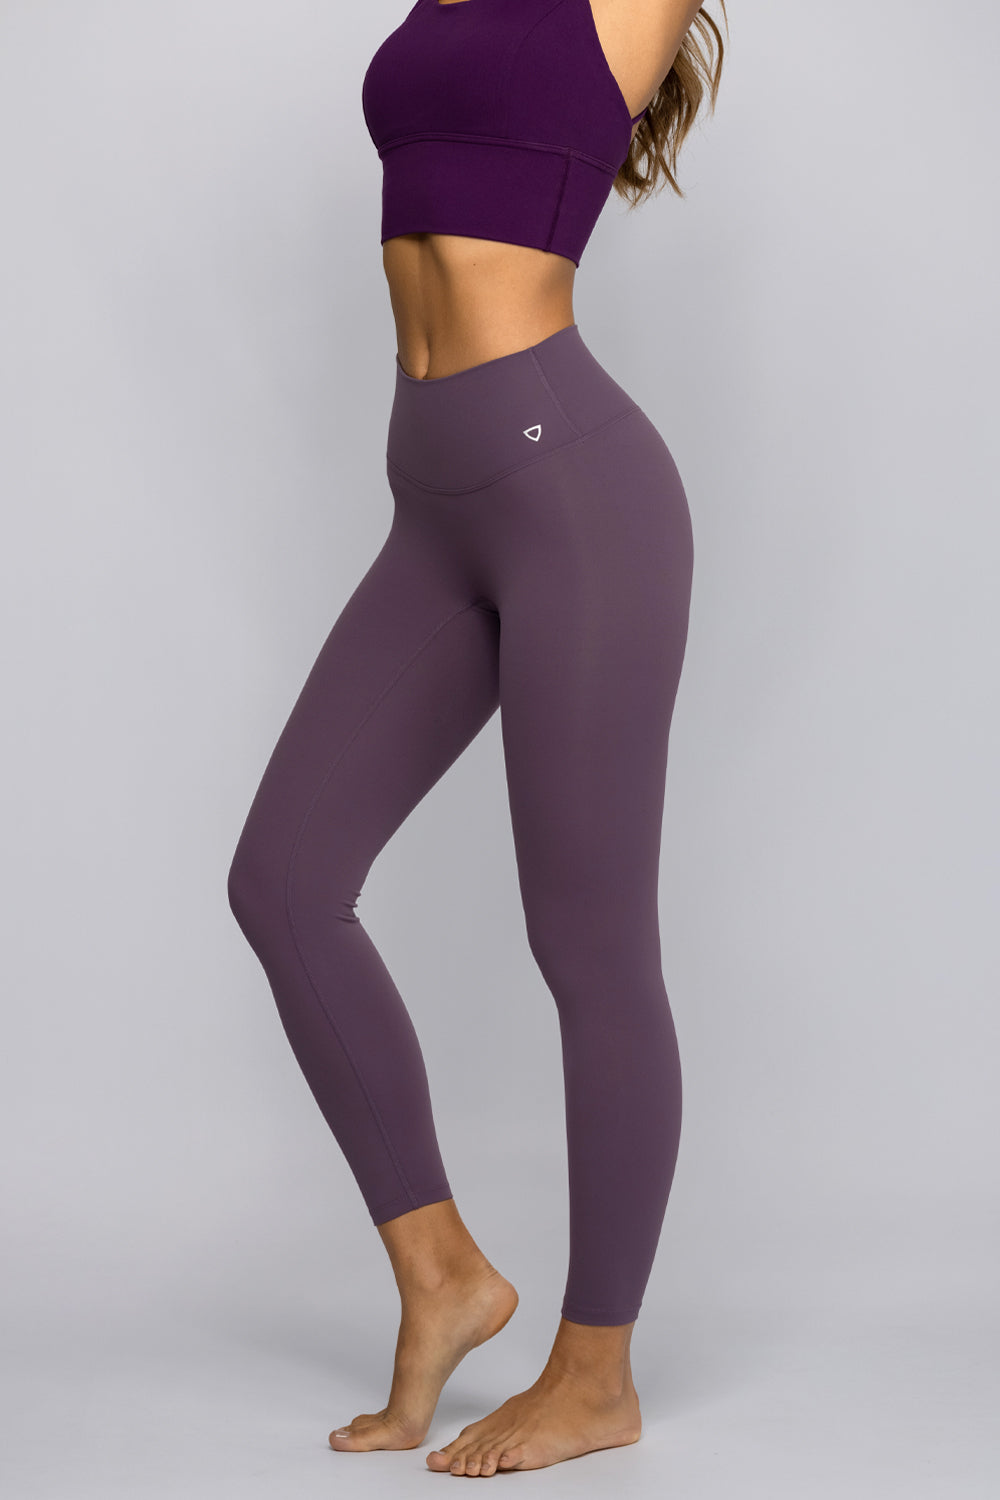 Luxana Leggings - Sage Green  Outfits with leggings, Premium